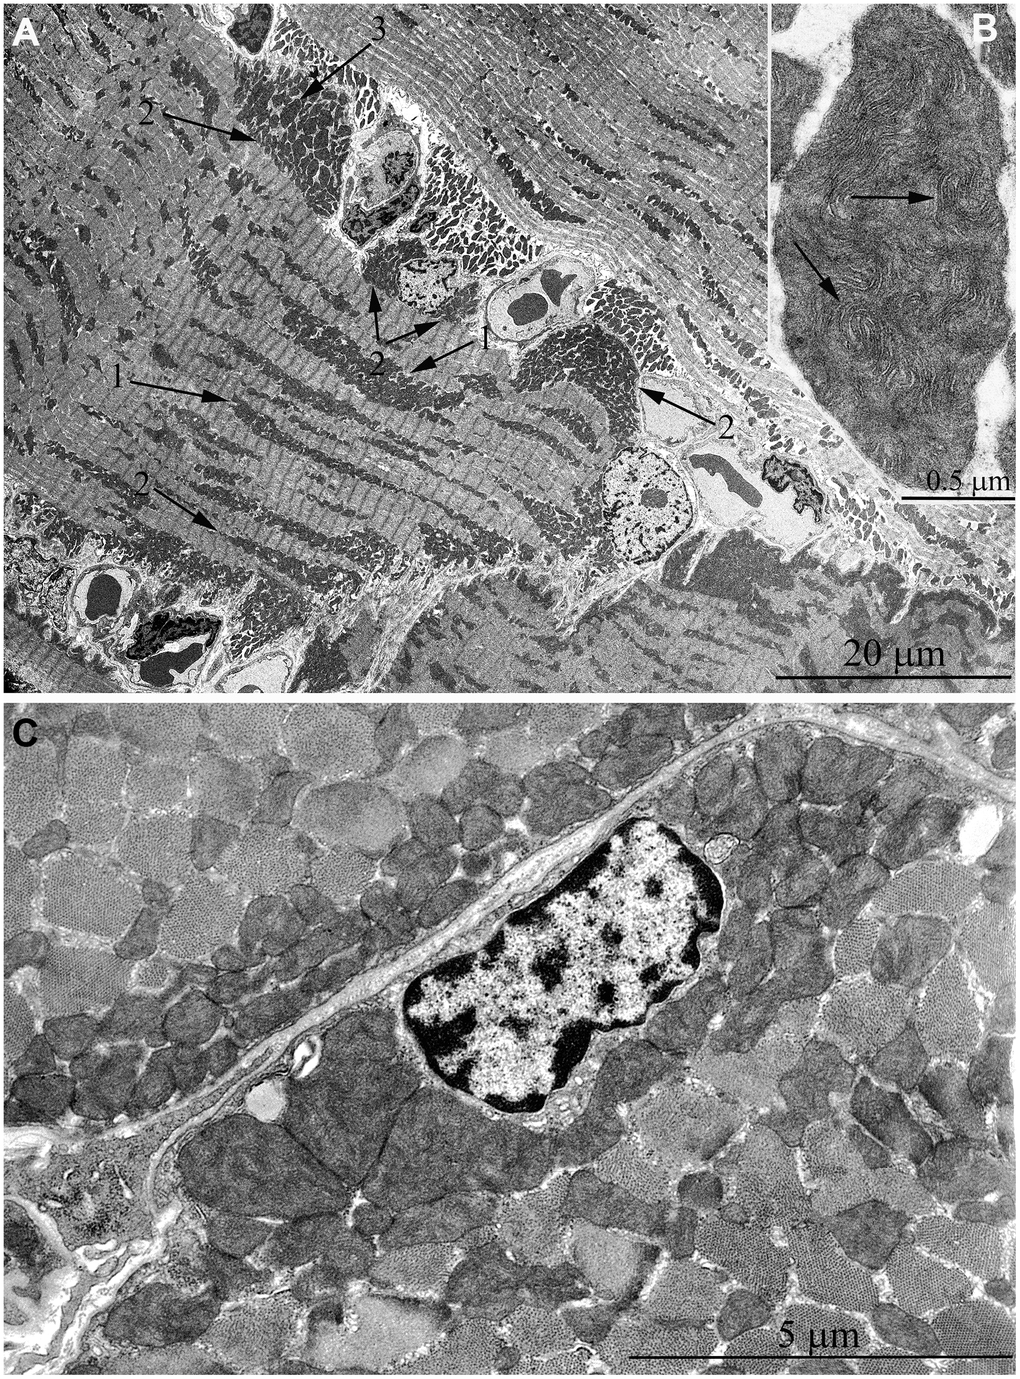 Ultrastructure of mitochondria in skeletal muscle of 11-year-old naked mole rat. (A) Longitudinal section of muscle fiber. Arrows 1 indicate large clusters of mitochondria located along myofibrils; arrows 2 indicate large clusters of mitochondria in the perinuclear and subsarcolemmal areas. Mitochondrion which specific ultrastructure is demonstrated under higher magnification in Figure 6B is indicated by arrow 3. (B) Mitochondrion which specific ultrastructure, convoluted stacks of cristae are indicated by arrows. (C) Cross section of muscle fiber. Similar ultrastructural pattern in the cross-section of muscle fiber is typical of cross-sections of cardiomyocytes, excluding subsarcolemmal localization of the nucleus.